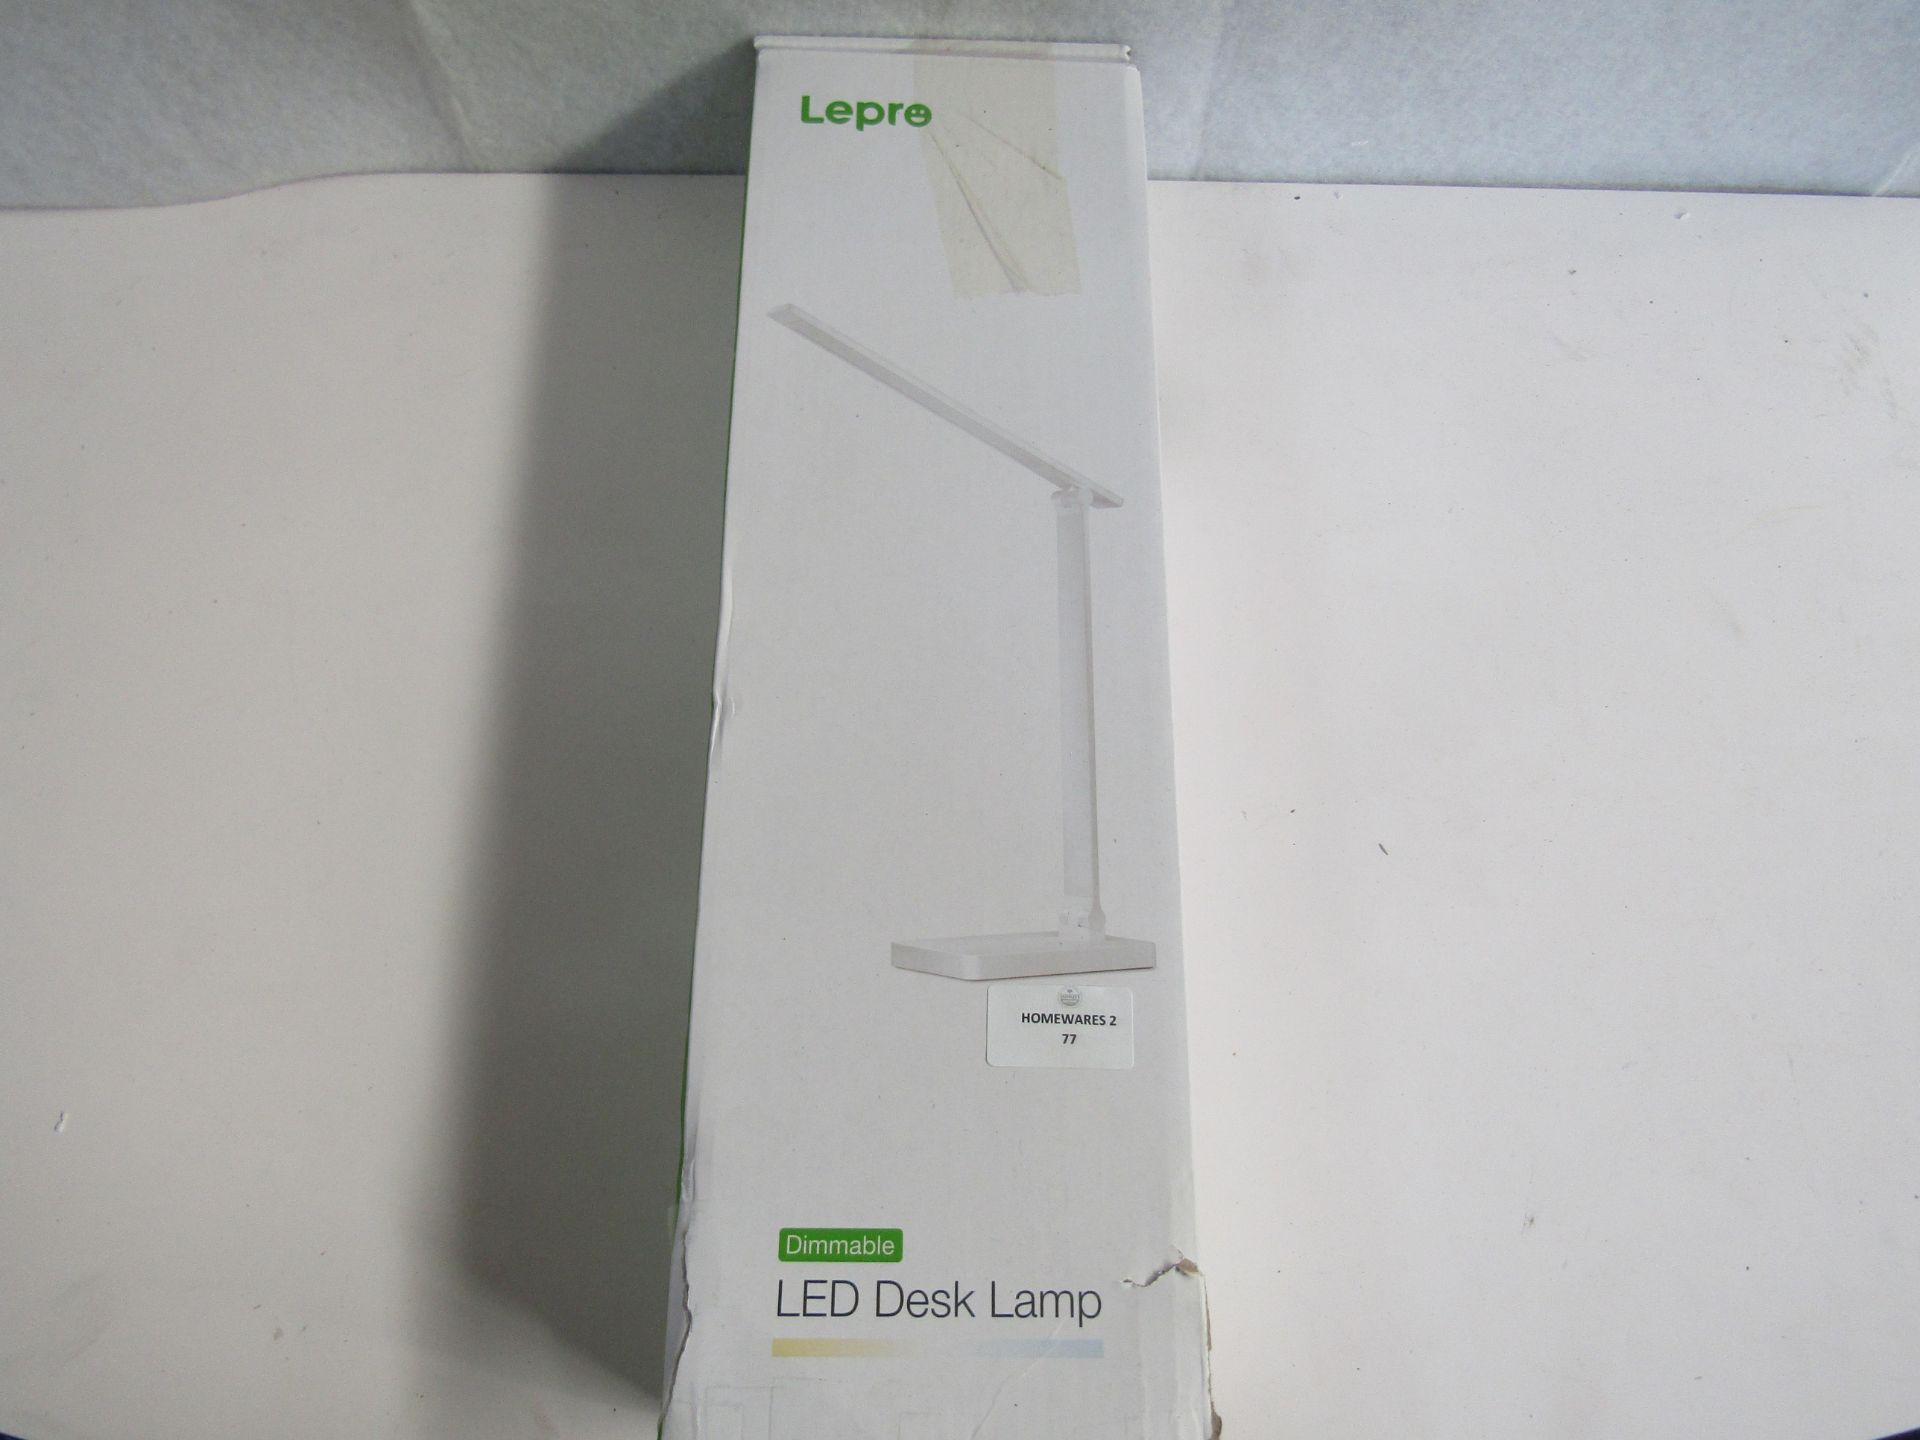 Lepre - Dimmable LED Desk Lamp - Untested & Boxed.